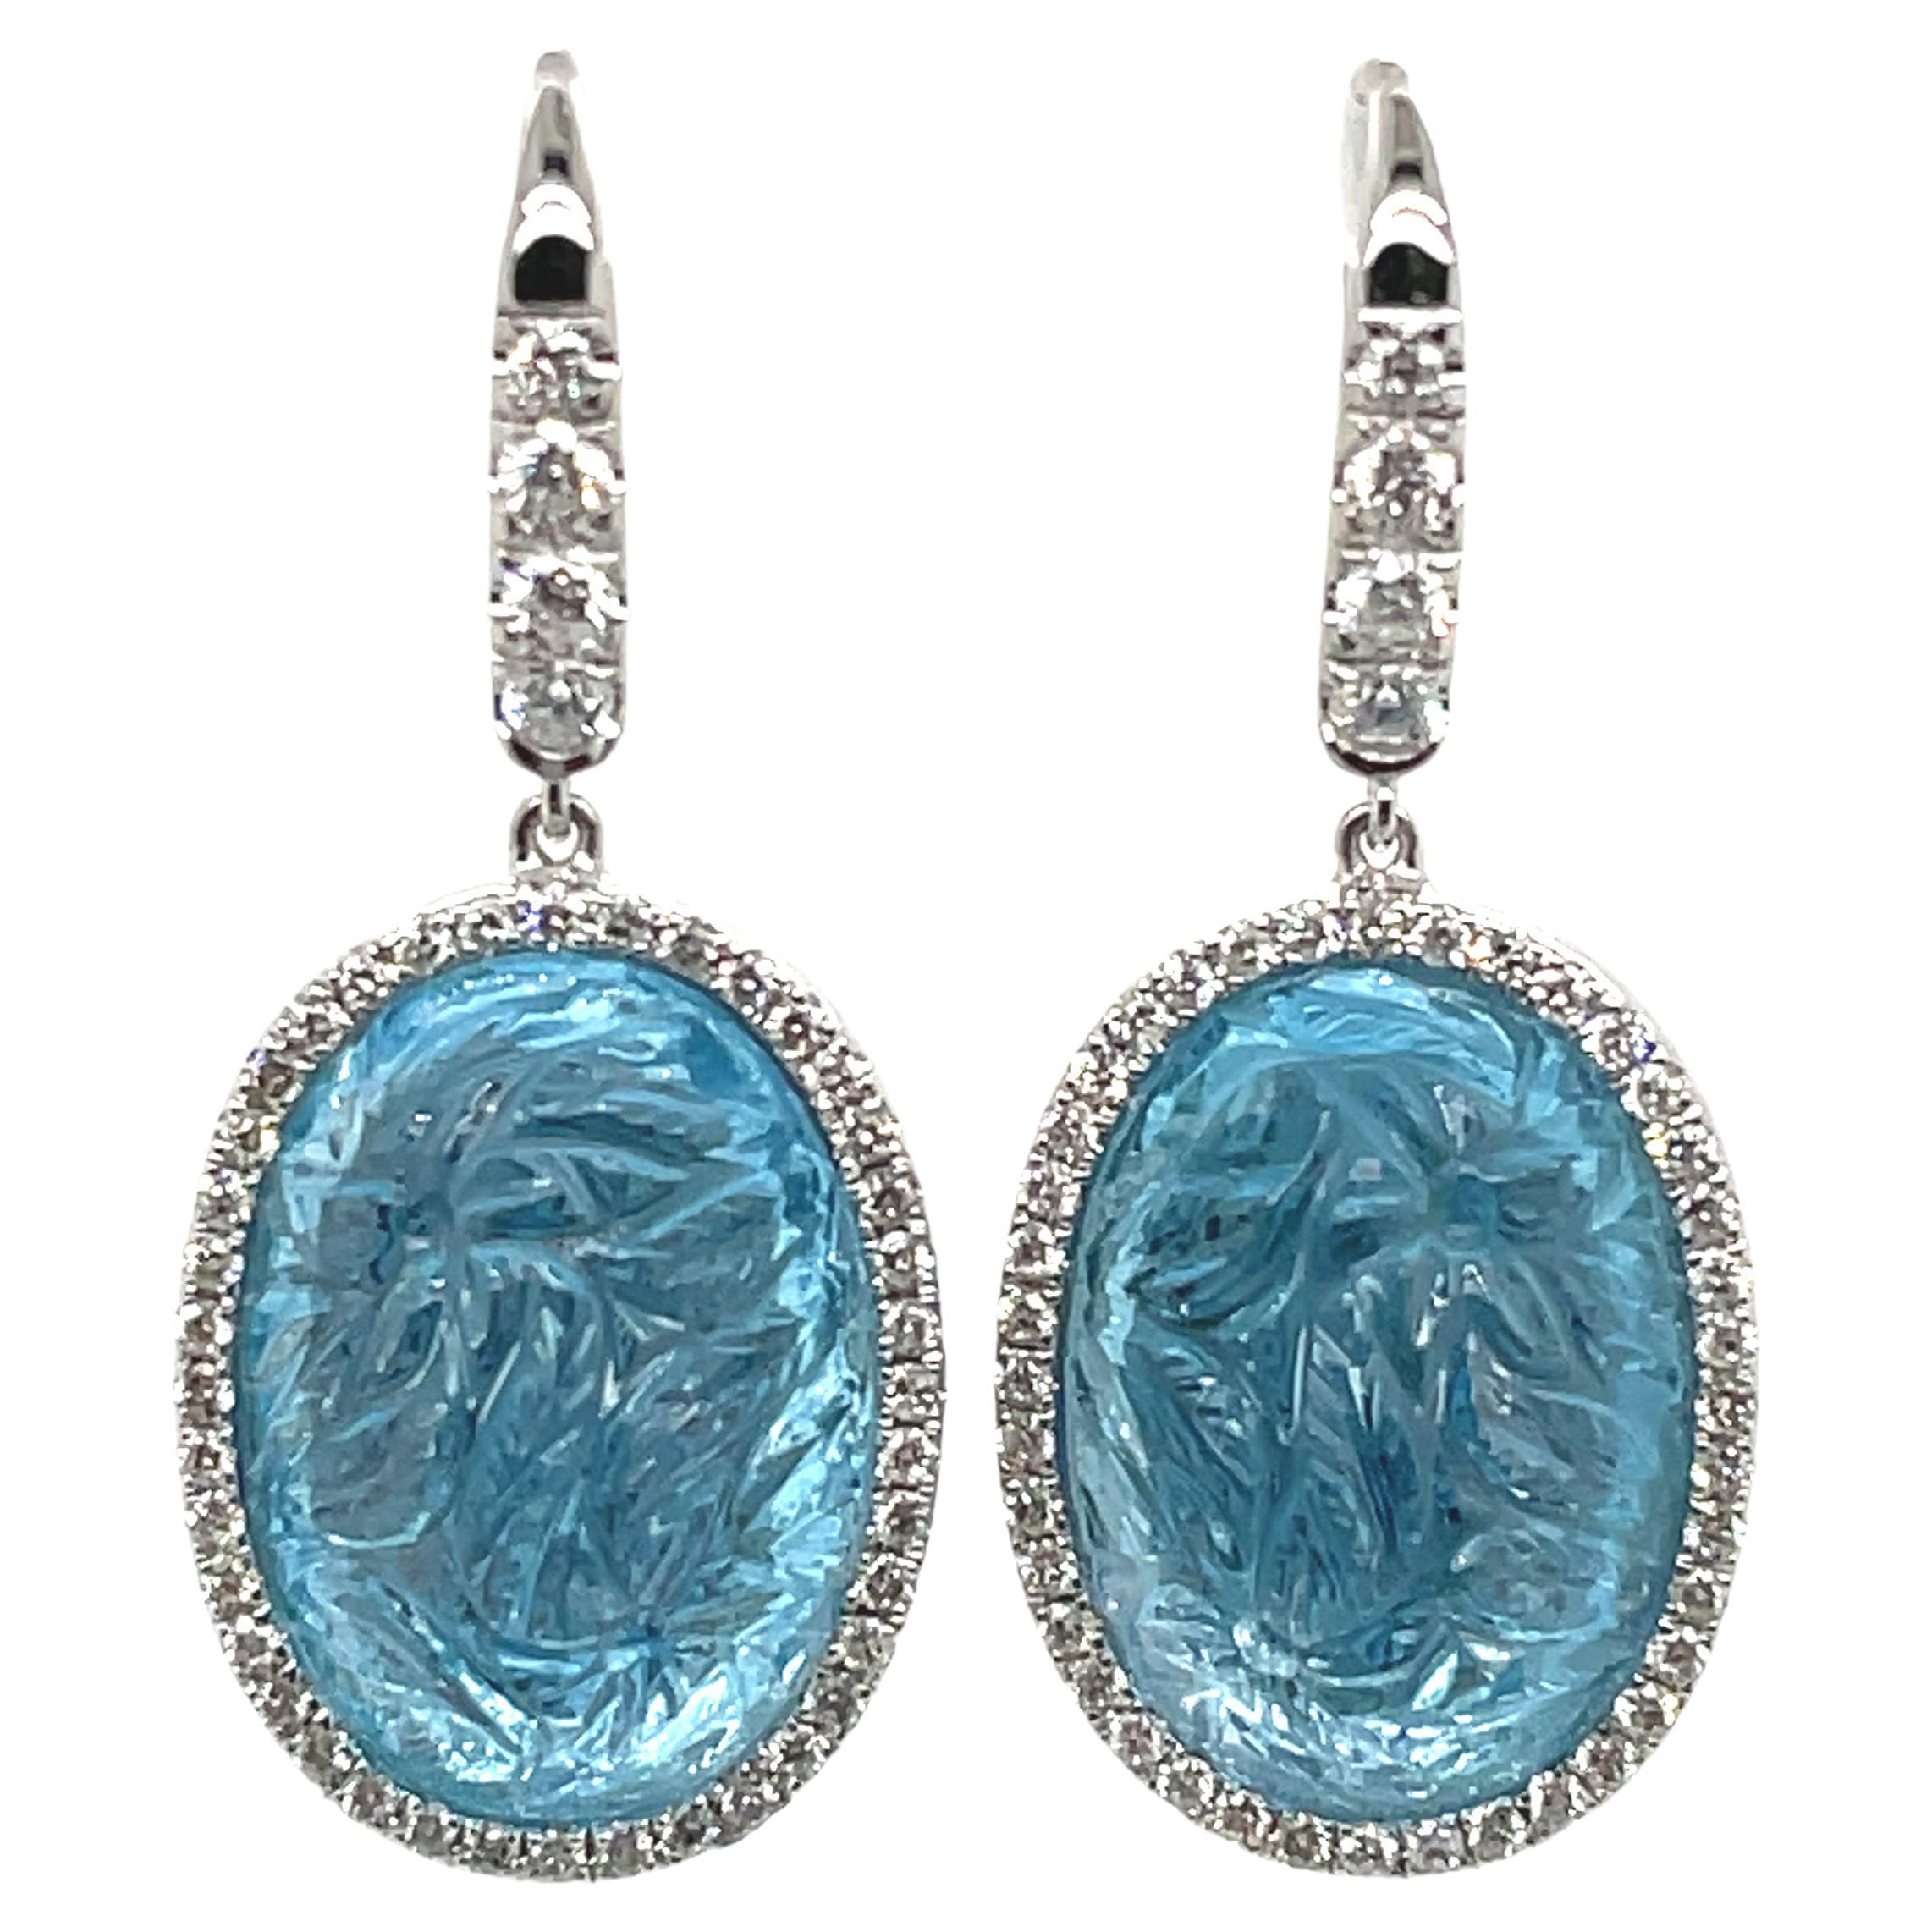 Carved Blue Topaz Cts 27.41 and Diamond Earrings Set in 18k White Gold